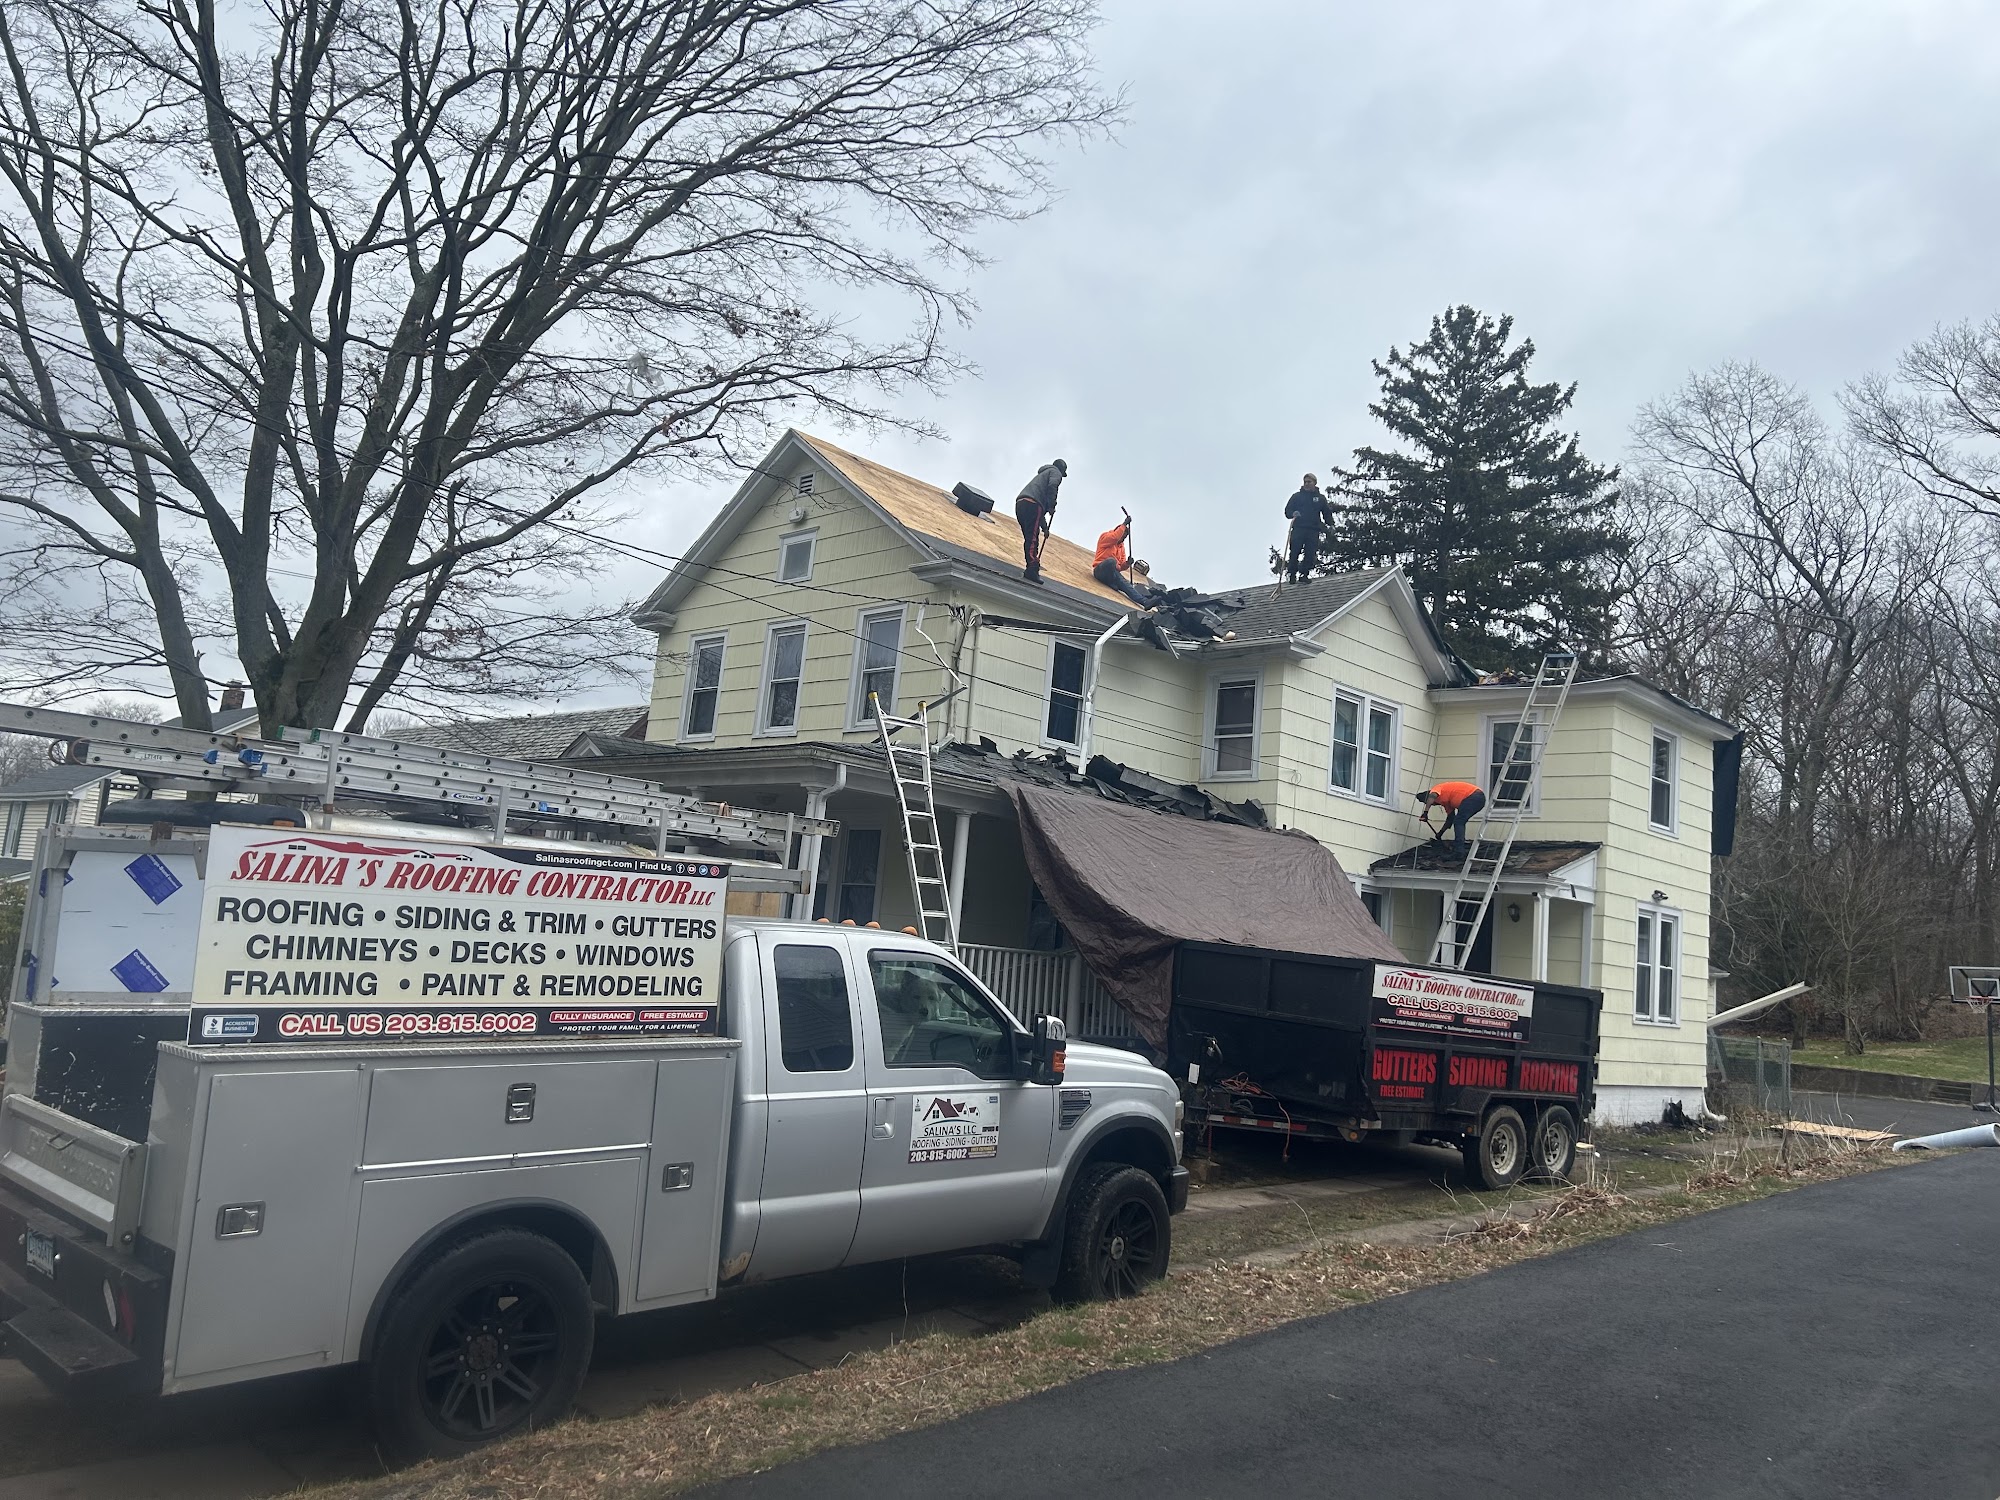 Salina's Roofing Siding & Gutters